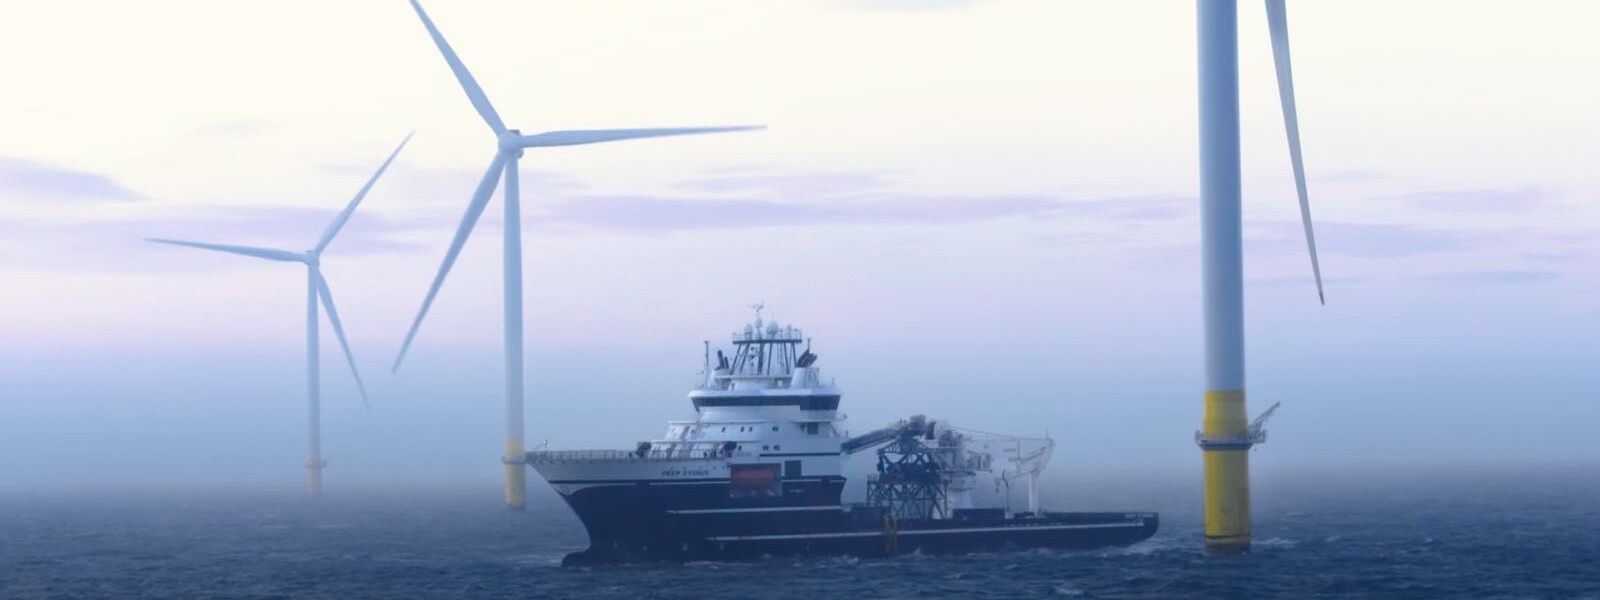 World's Largest Offshore Wind Farm Gets New Critical Communications Network